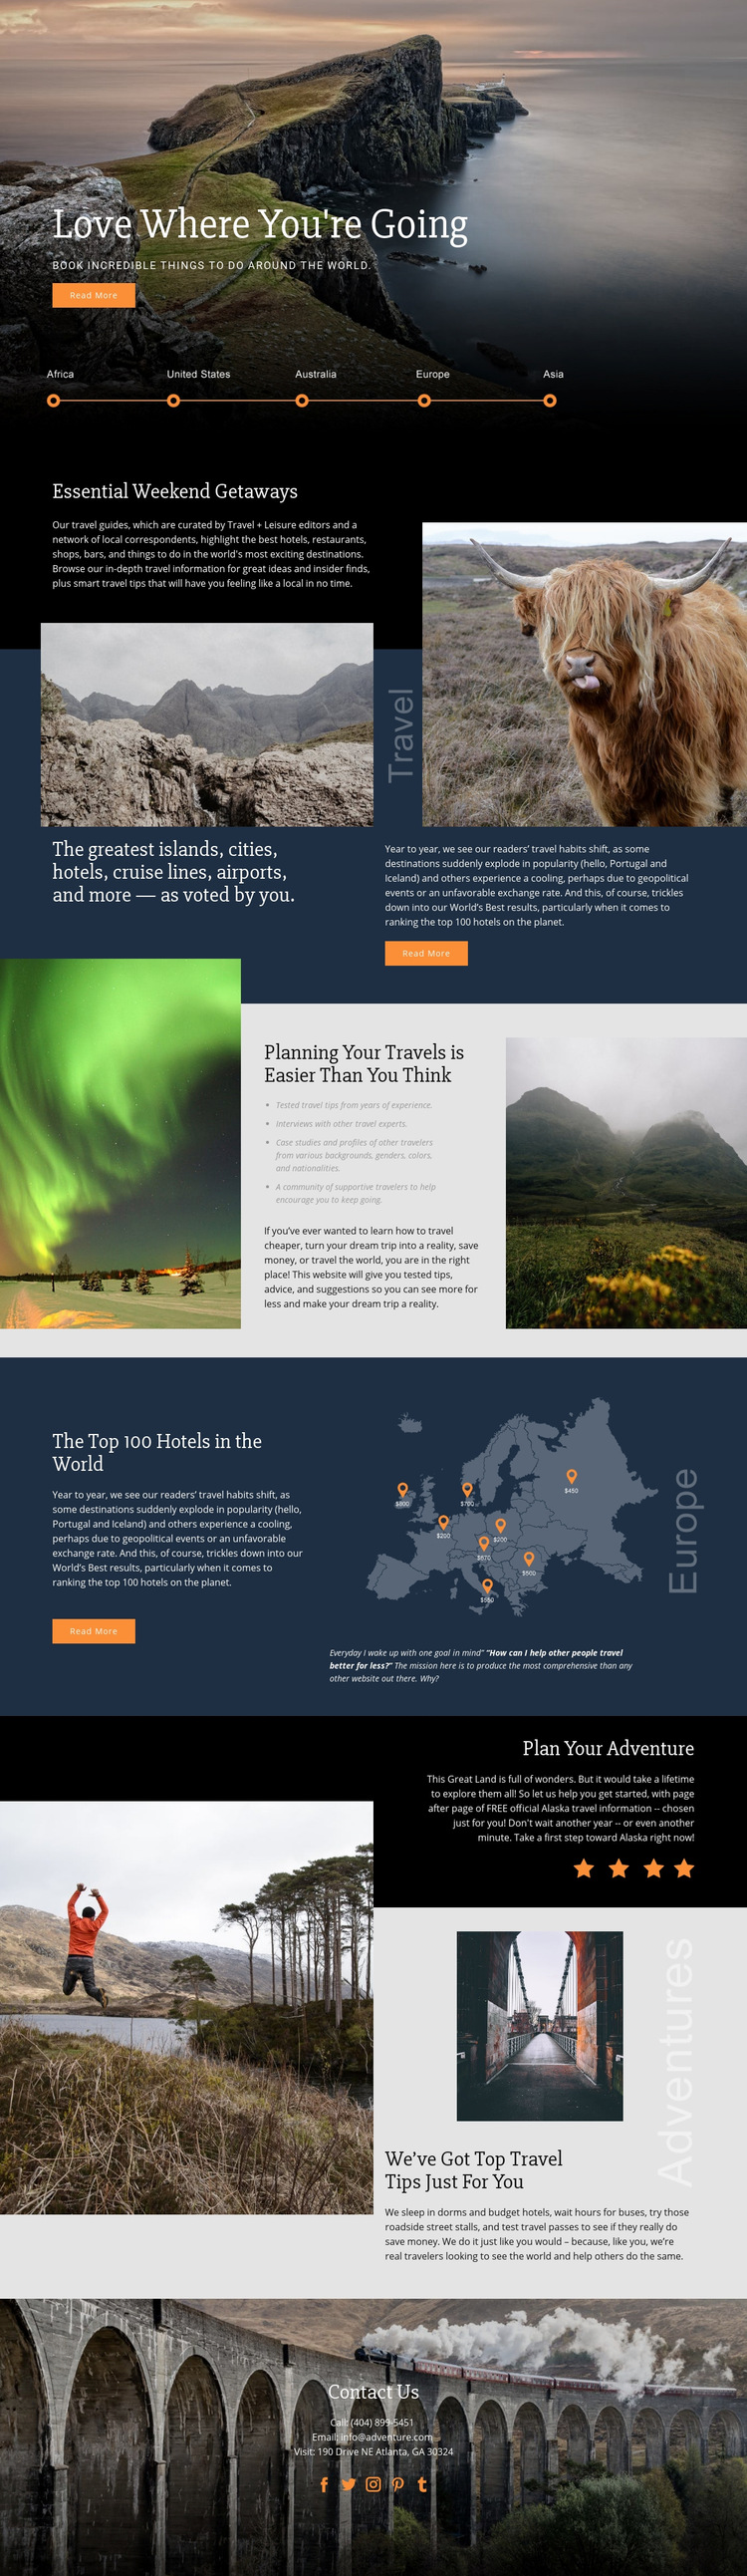 Planning Your Travel Web Page Design